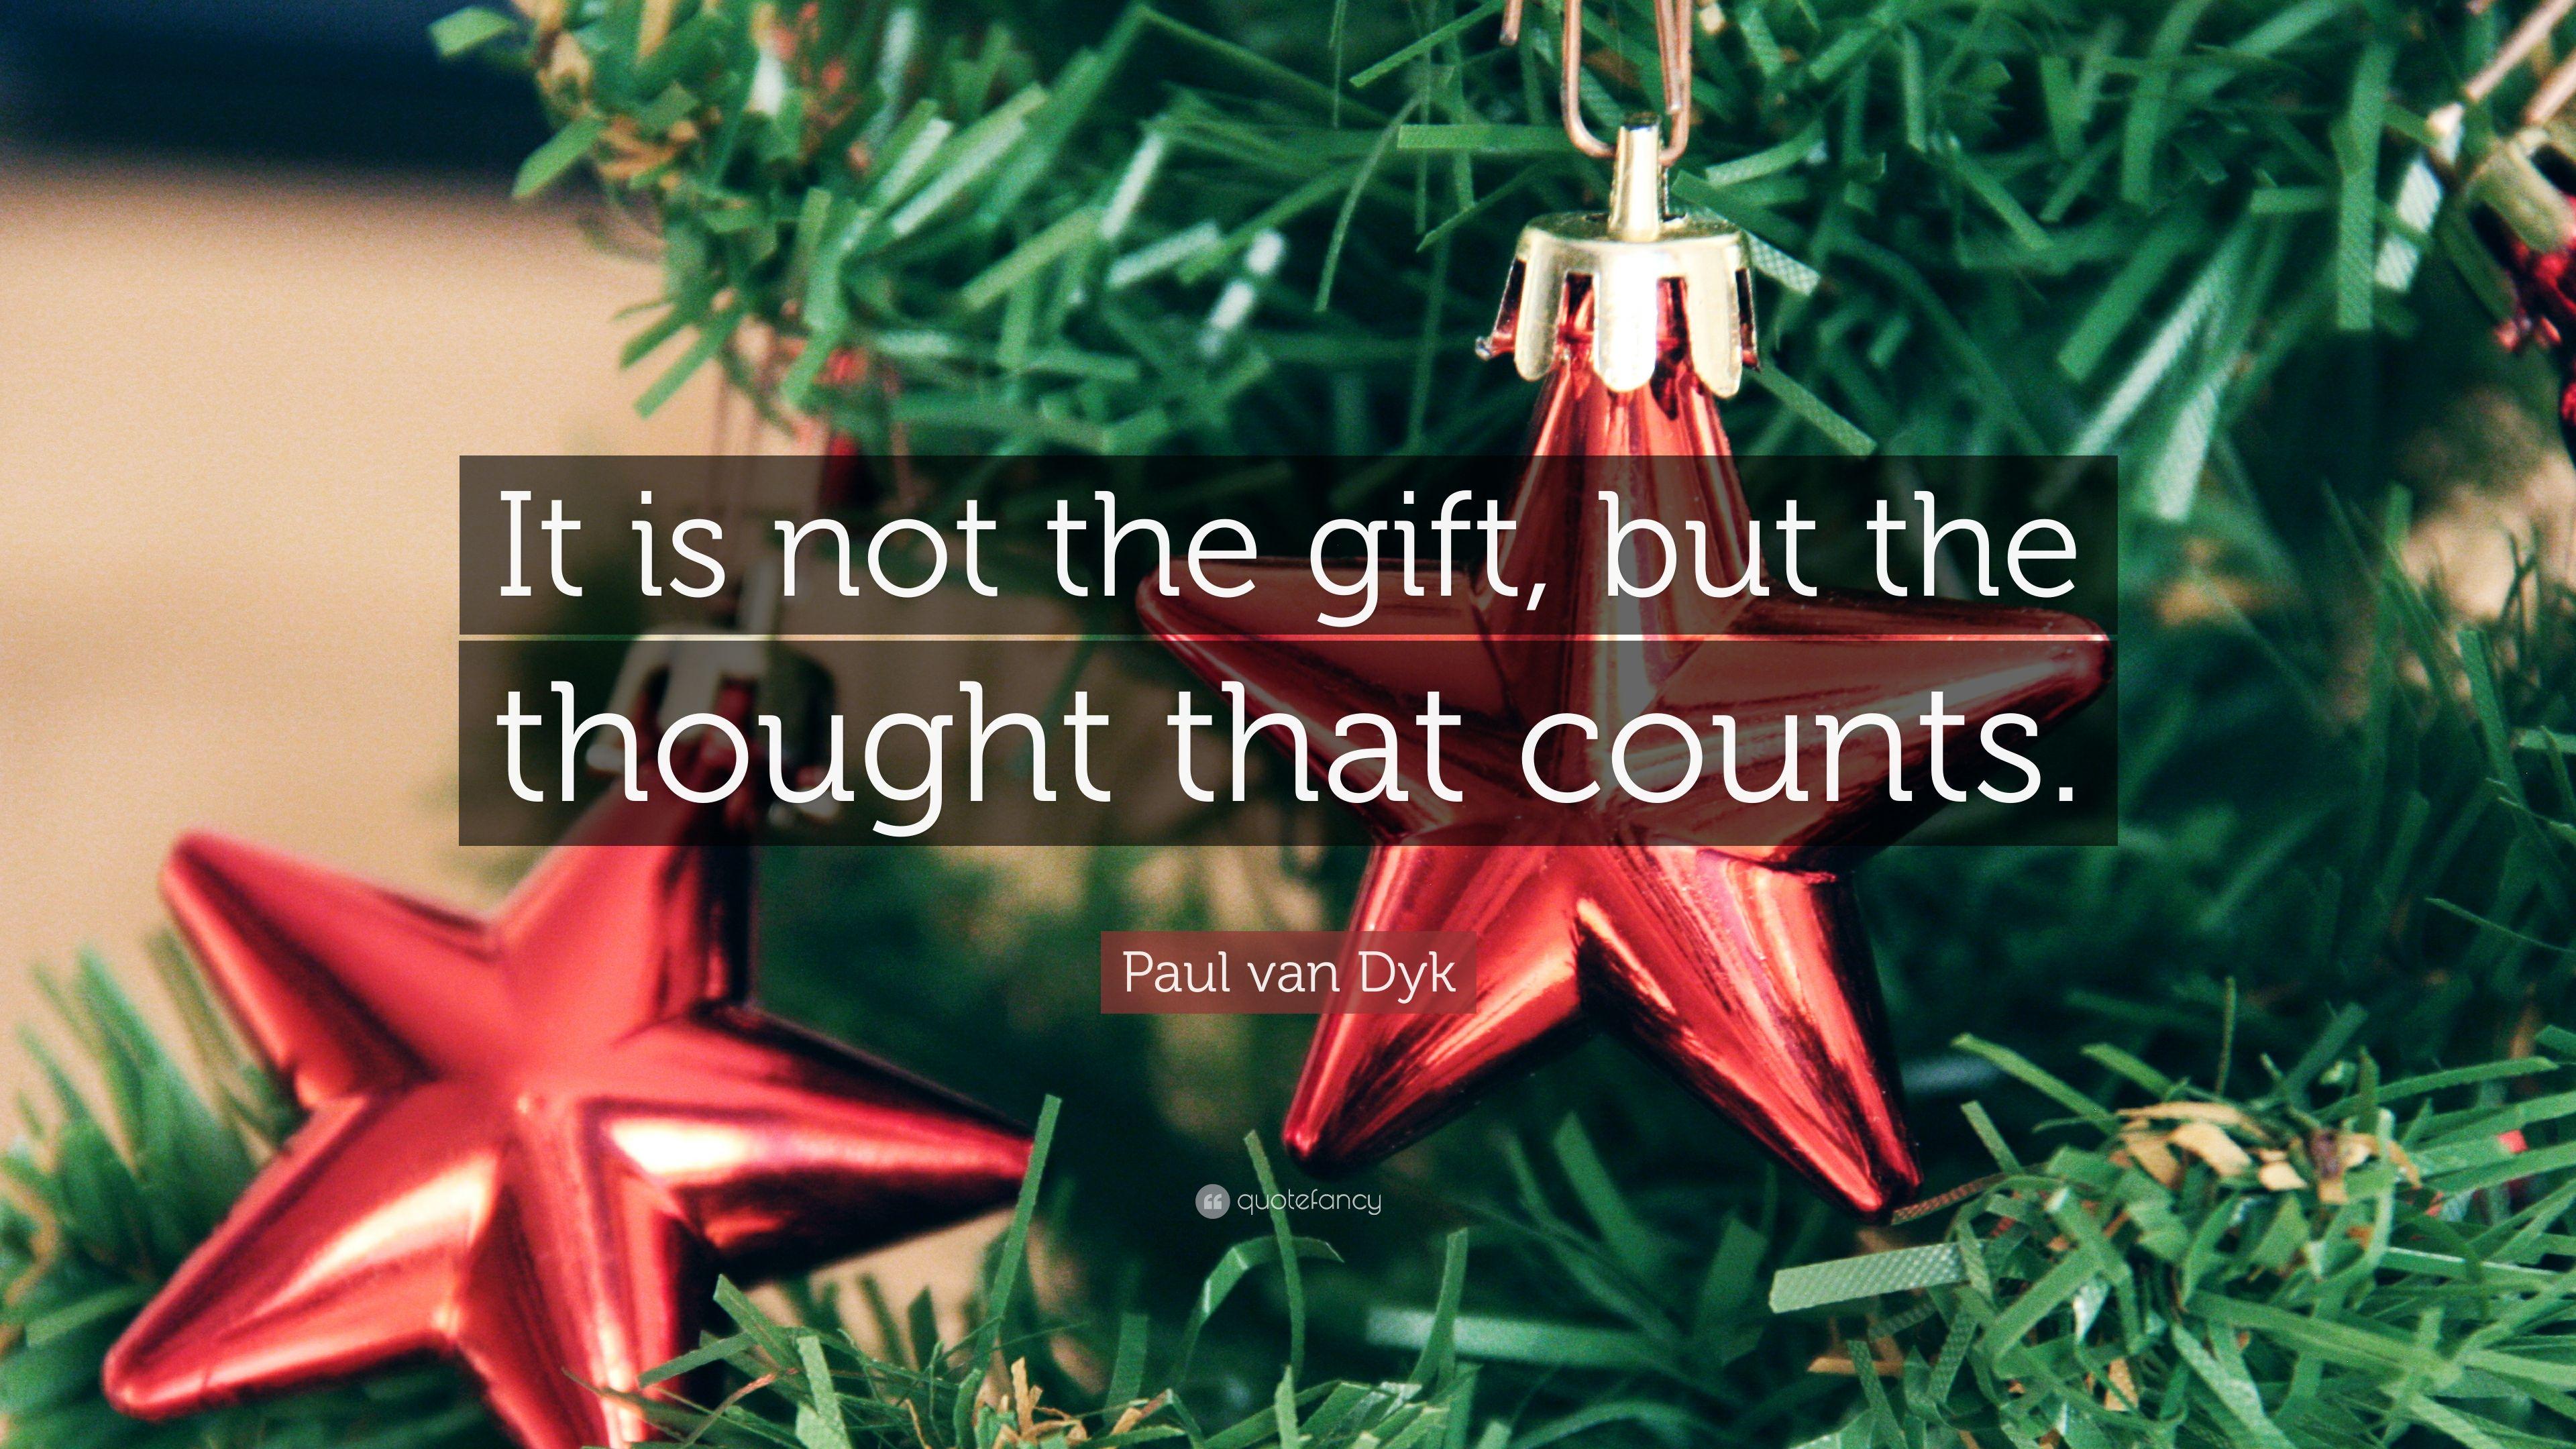 Paul van Dyk Quote: “It is not the gift, but the thought that counts